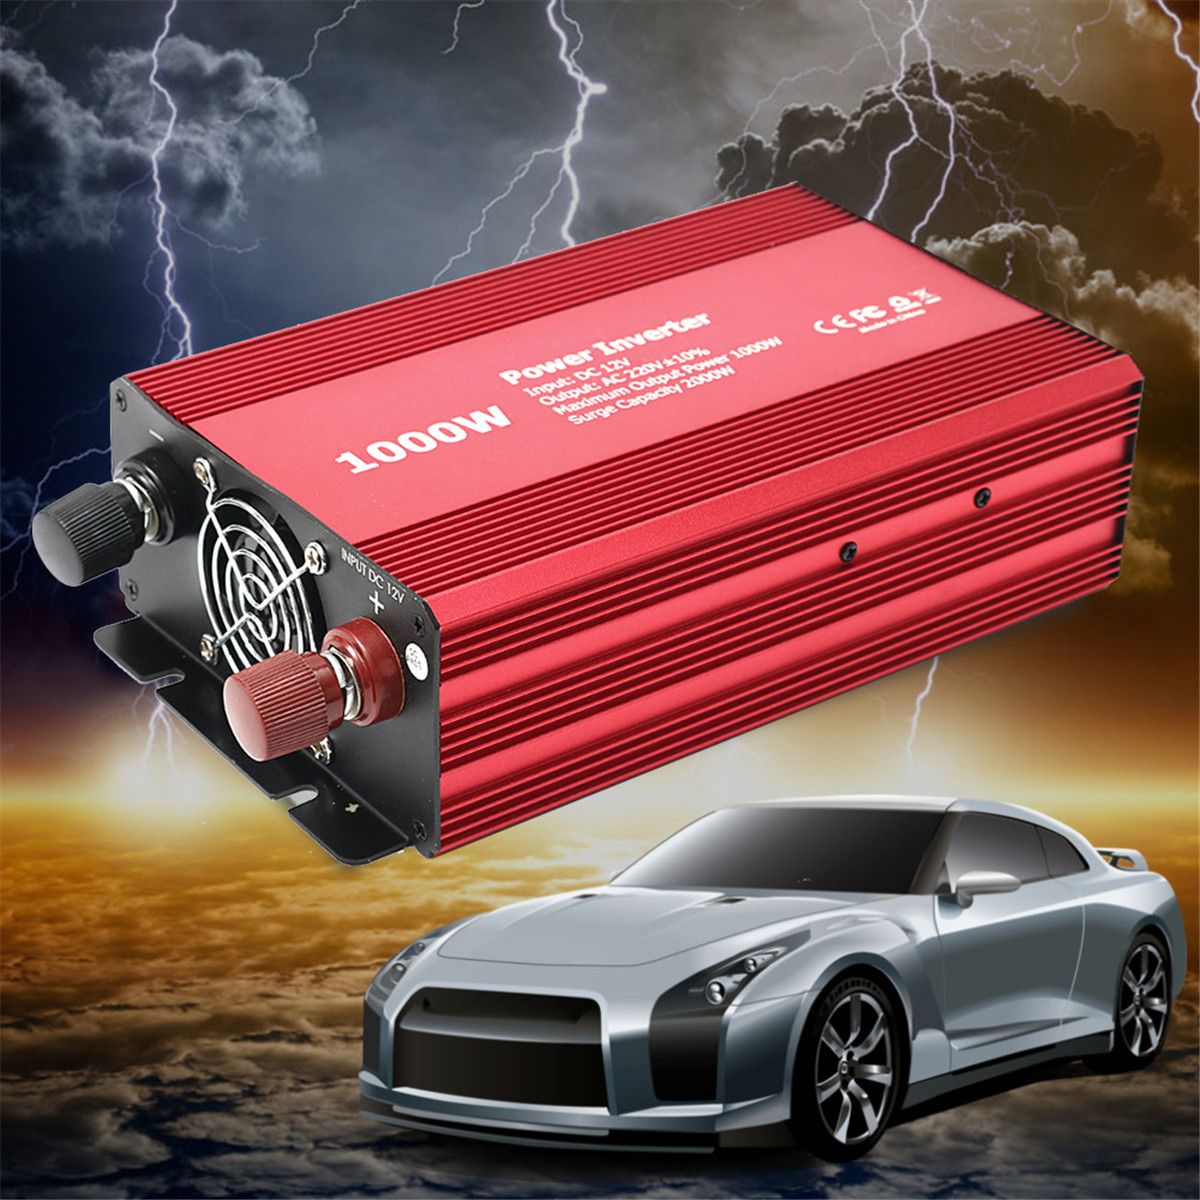 1000W-Car-Auto-Power-Inverter-12V-DC-to-220V-AC-Charger-Supply-Converter-Adapter-1167704